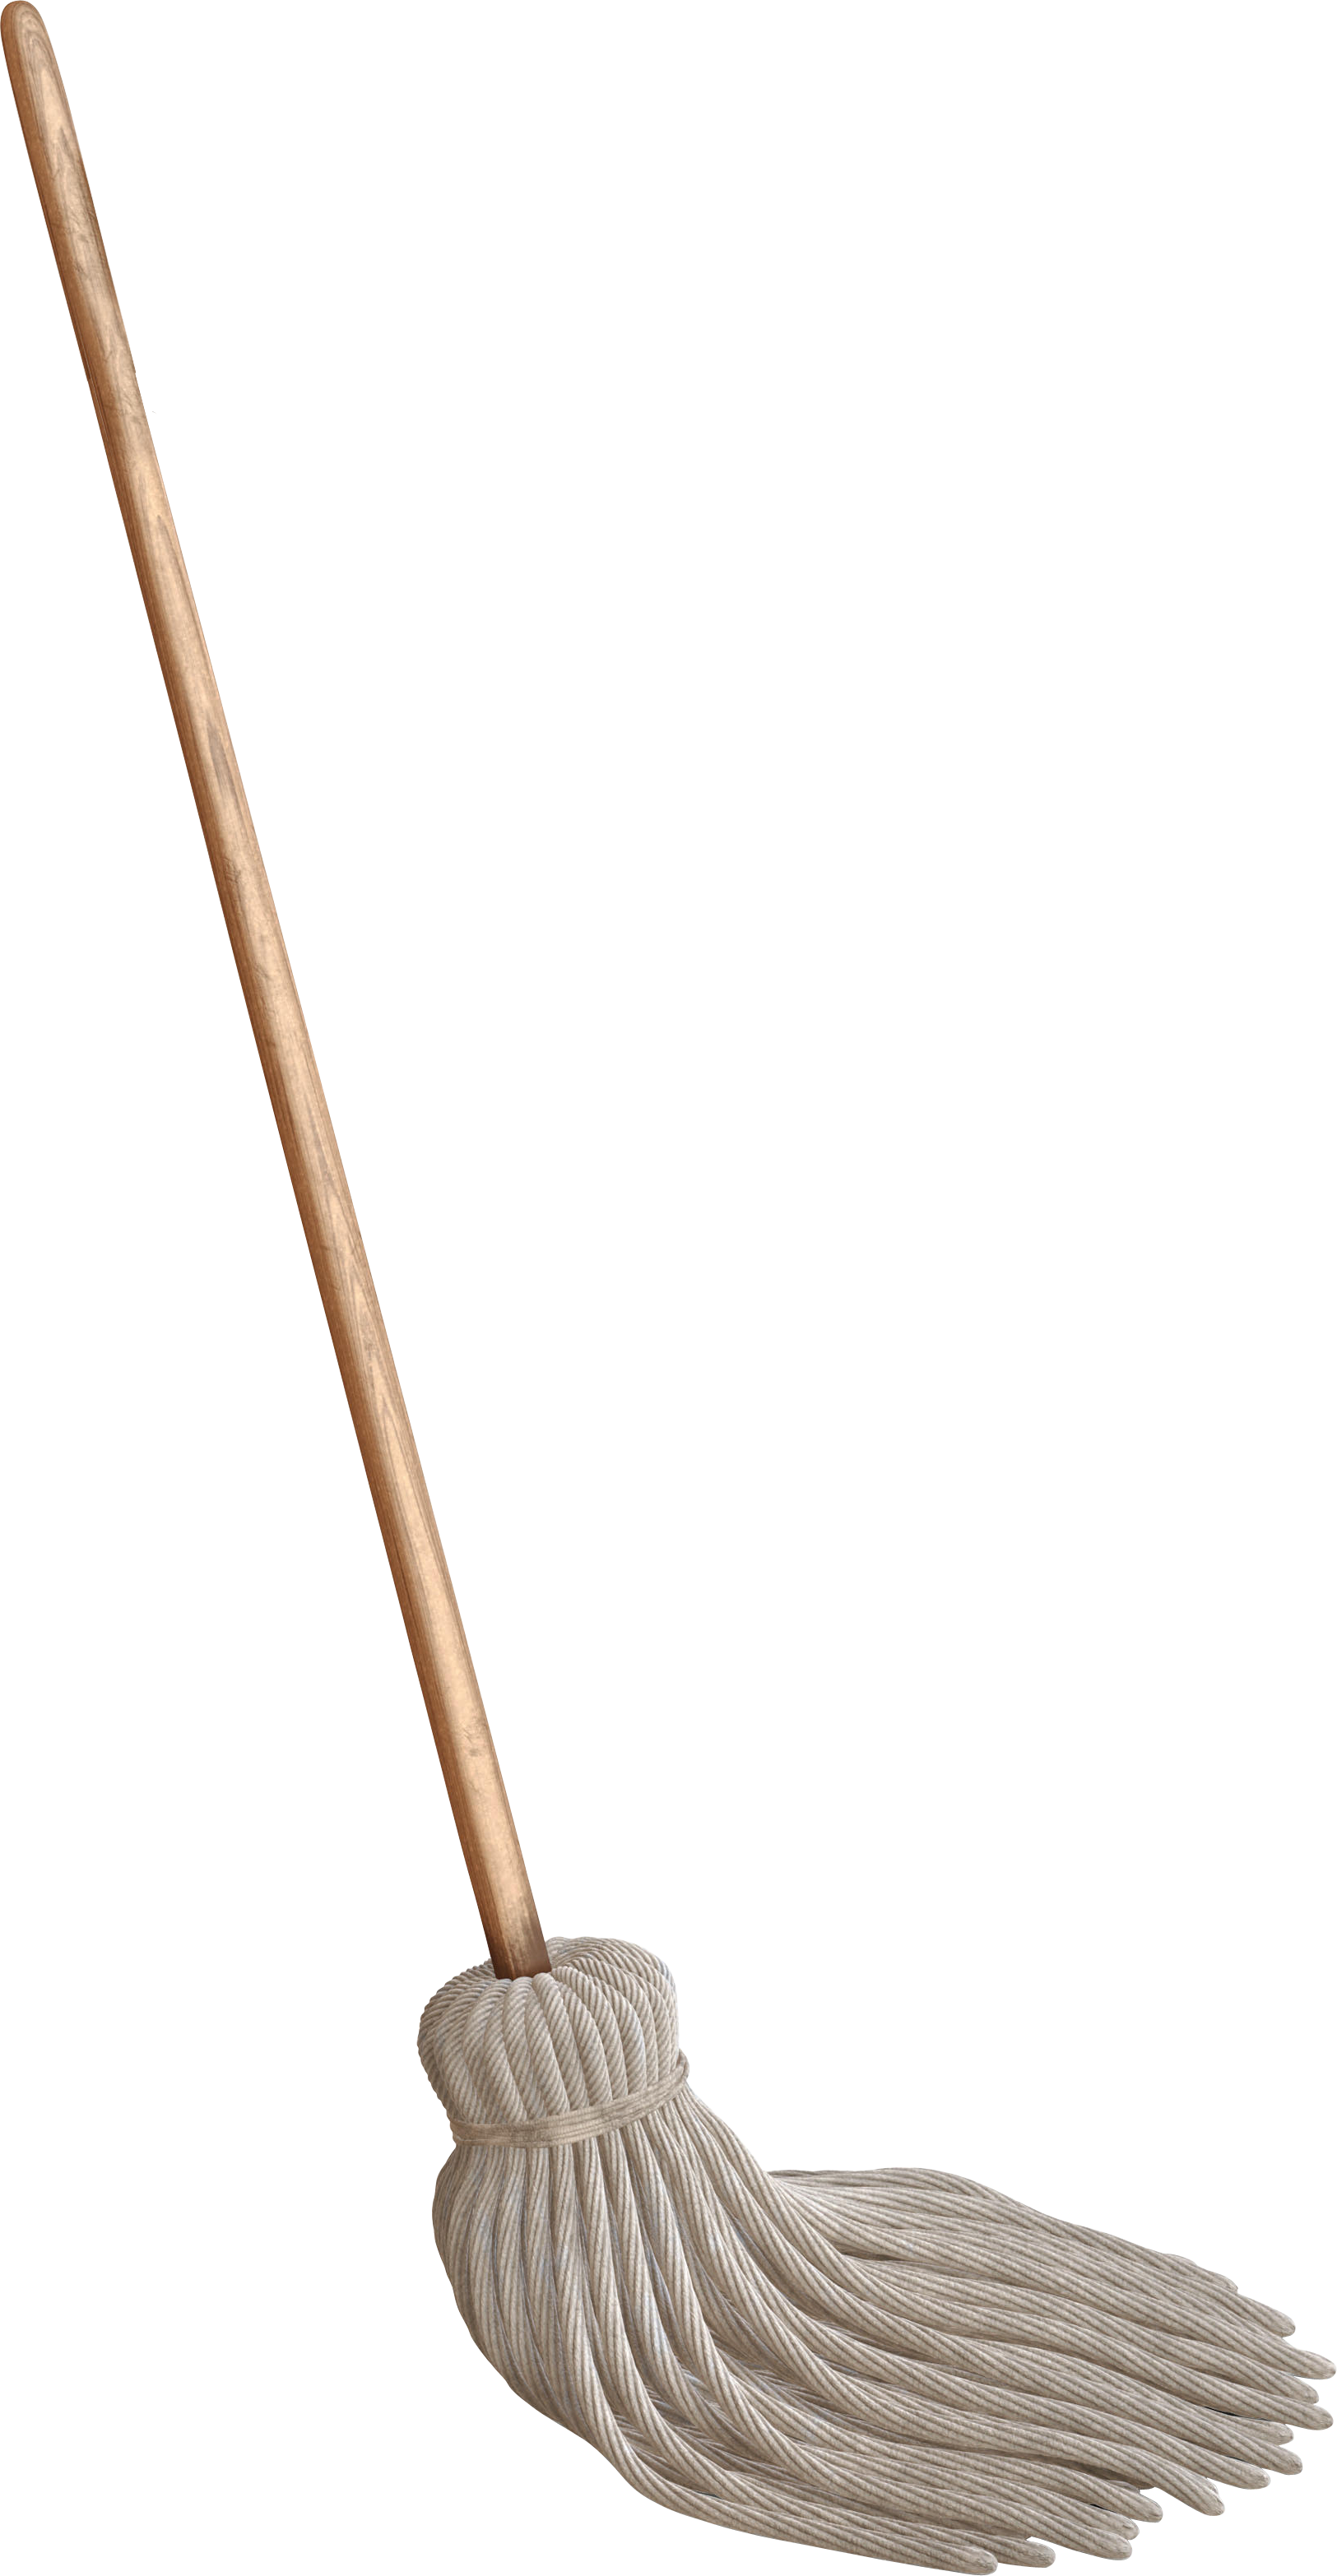 Traditional Wooden Handle Mop